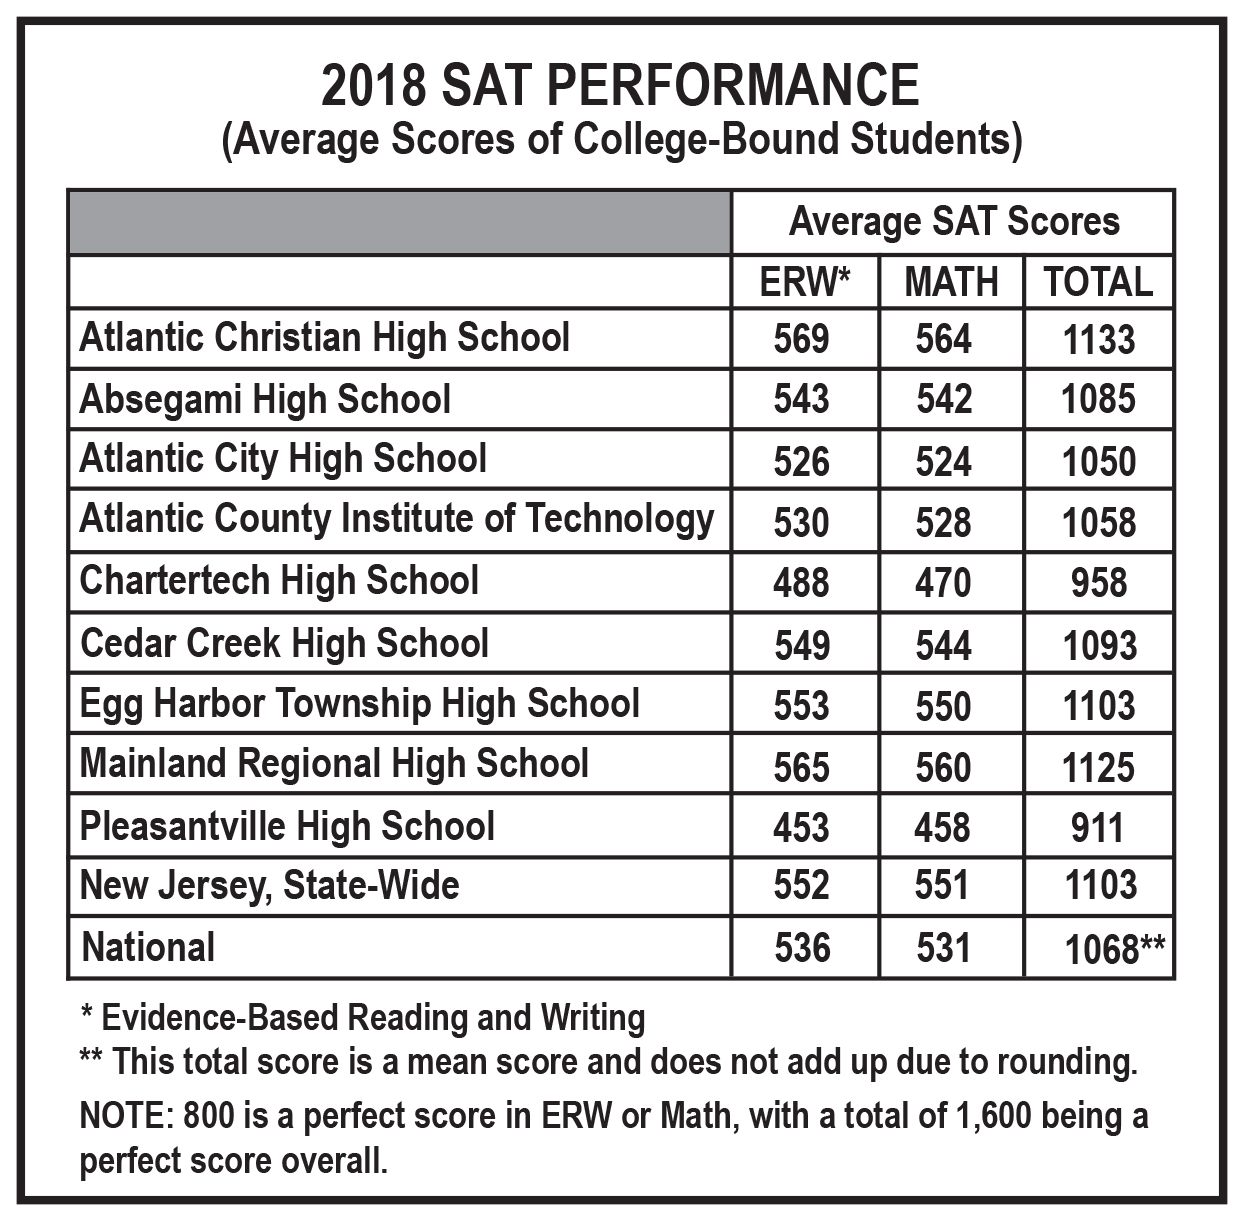 ACS Students Achieve SAT Scores Topping National, State, and County